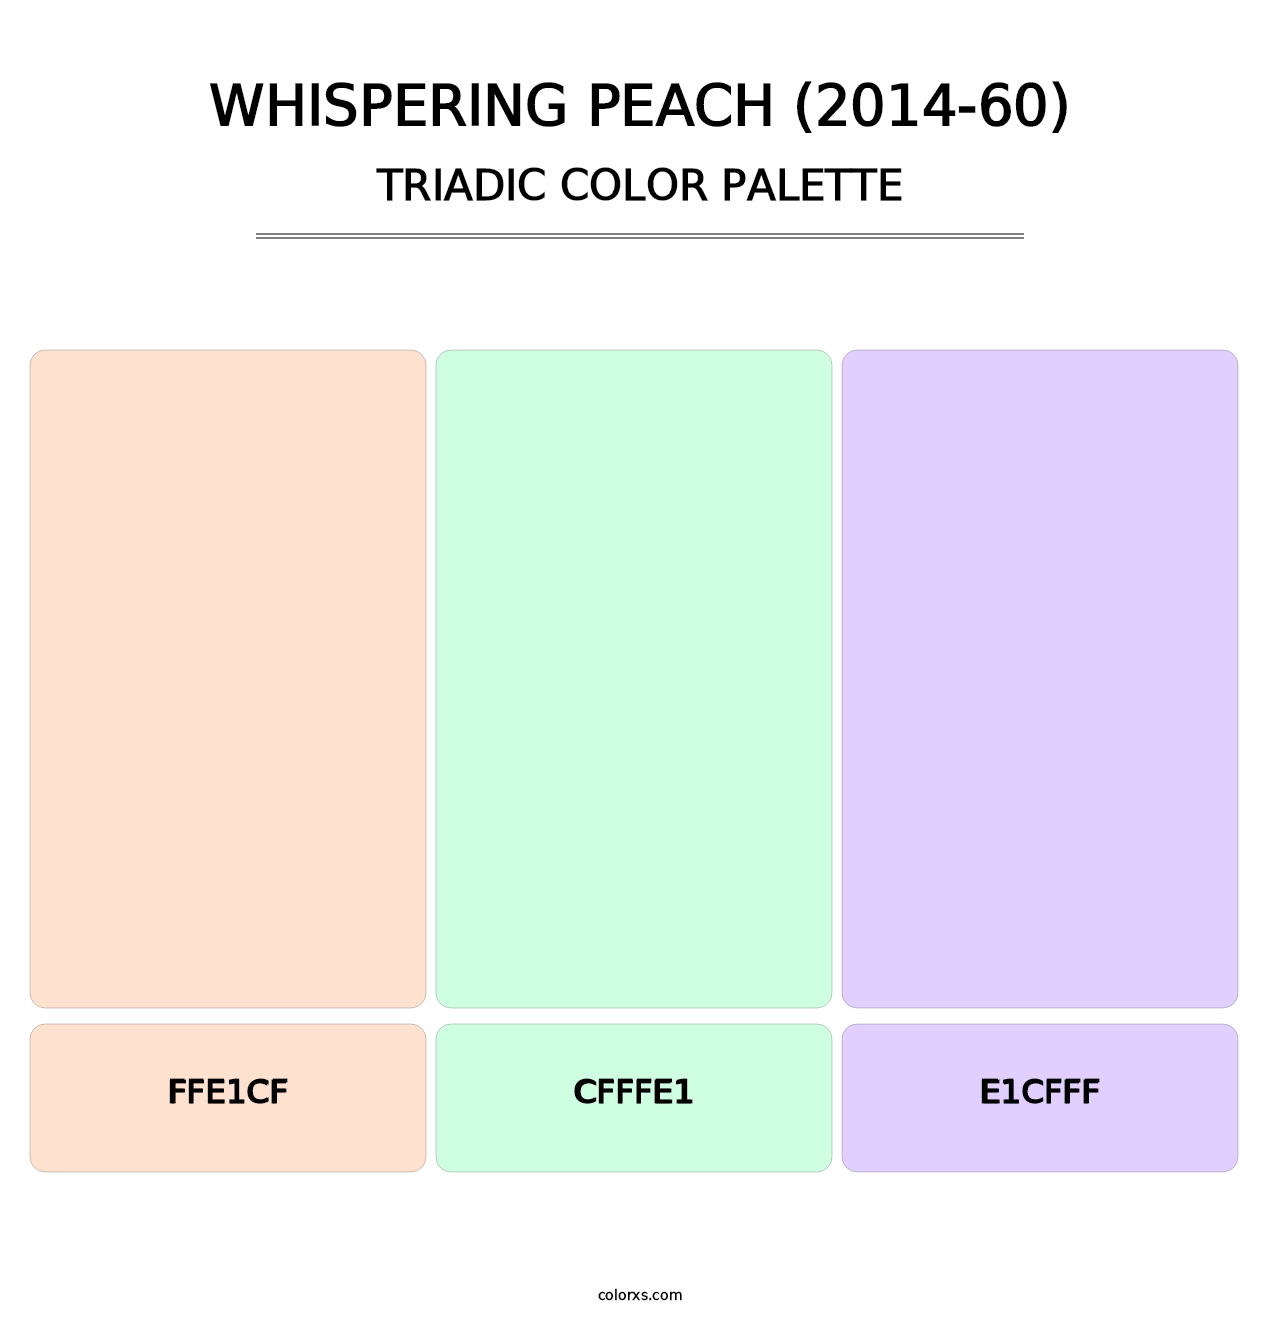 Whispering Peach (2014-60) - Triadic Color Palette